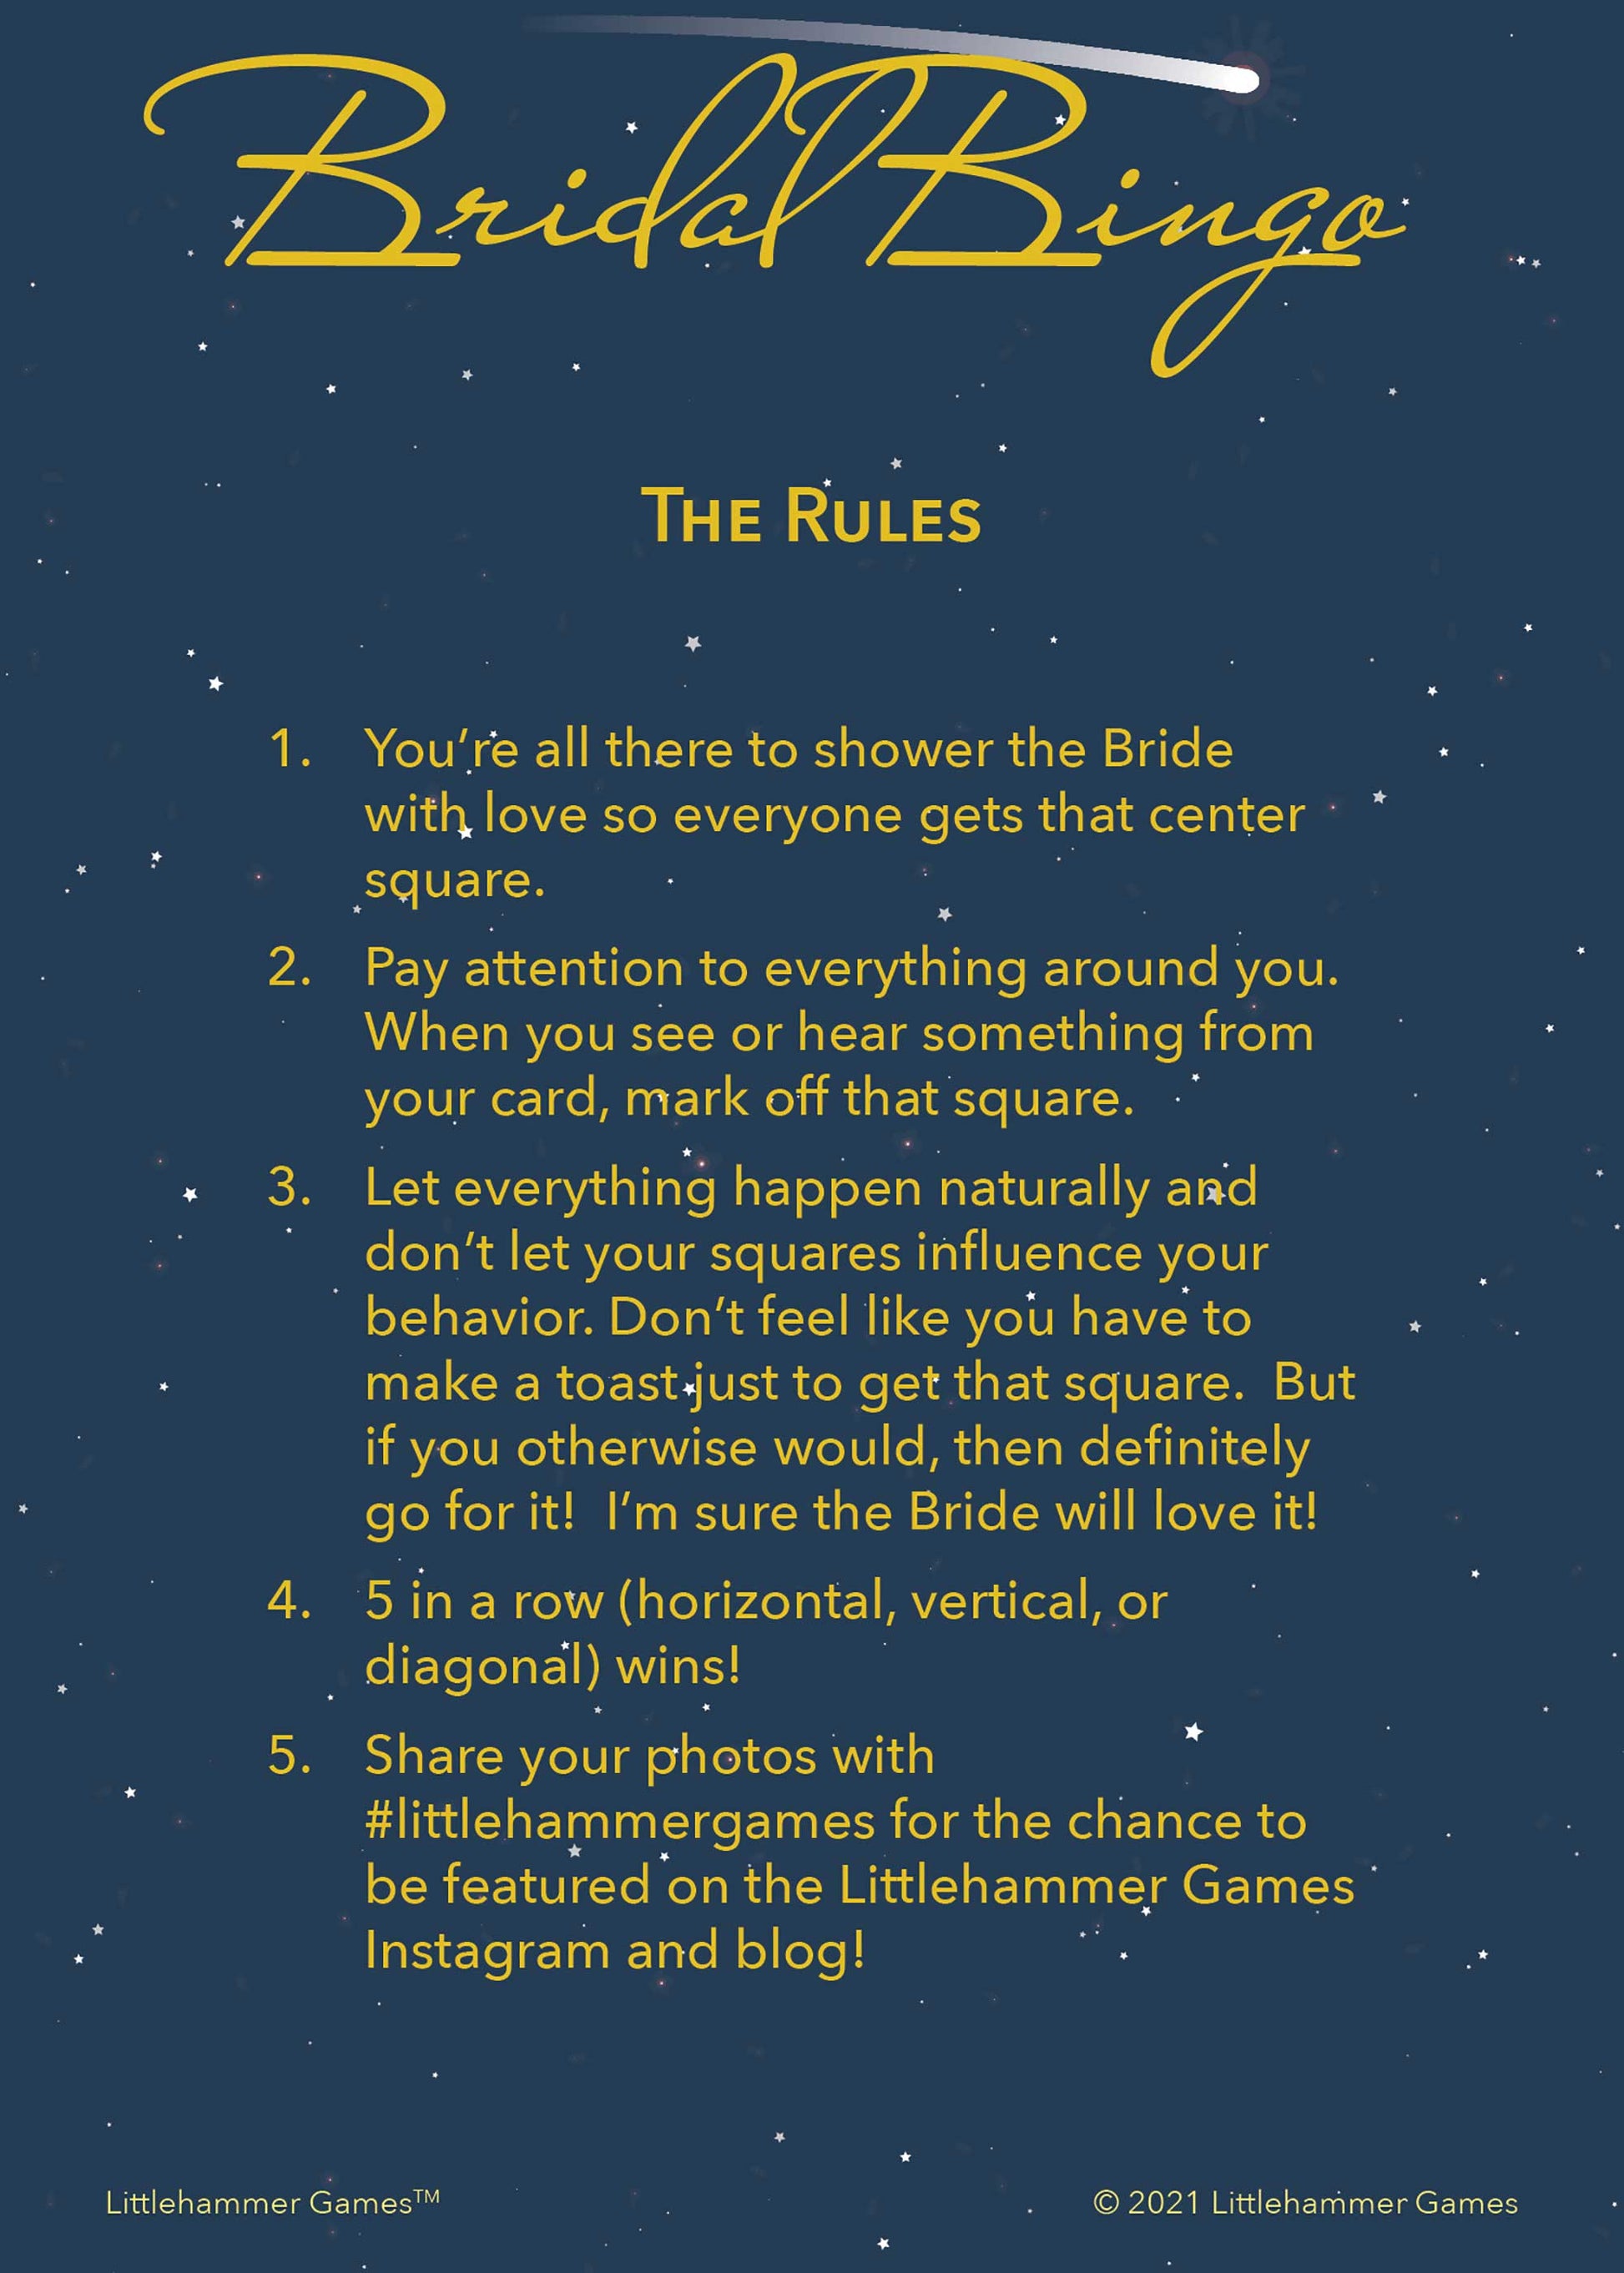 Bridal Bingo rules card with gold text on a celestial background